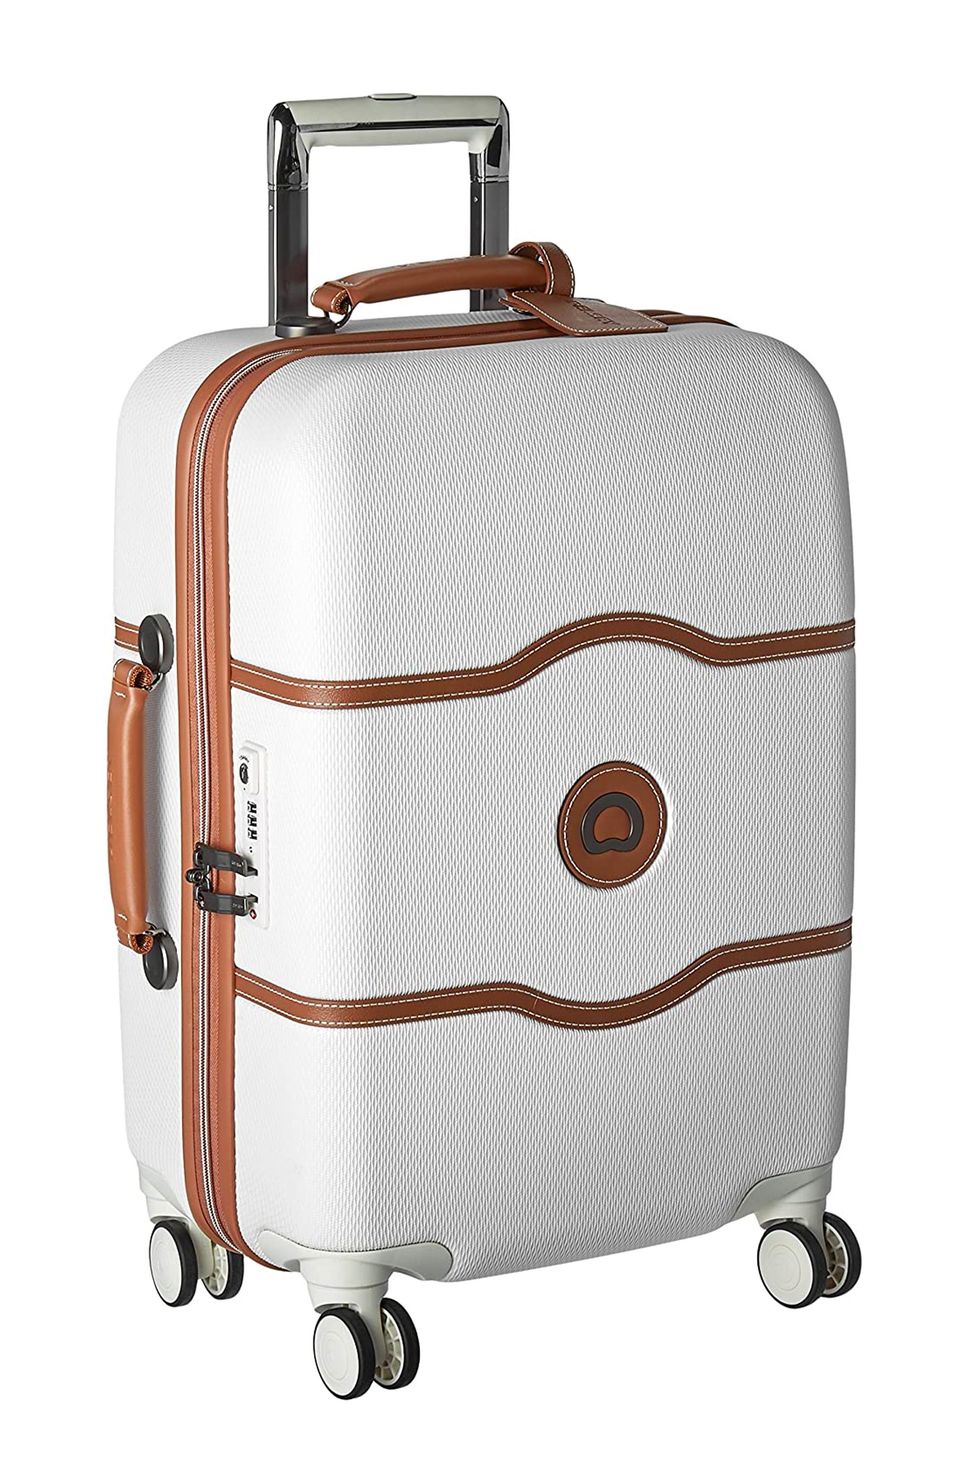 DELSEY Paris Chatelet Hard+ Hardside Luggage with Spinner Wheels